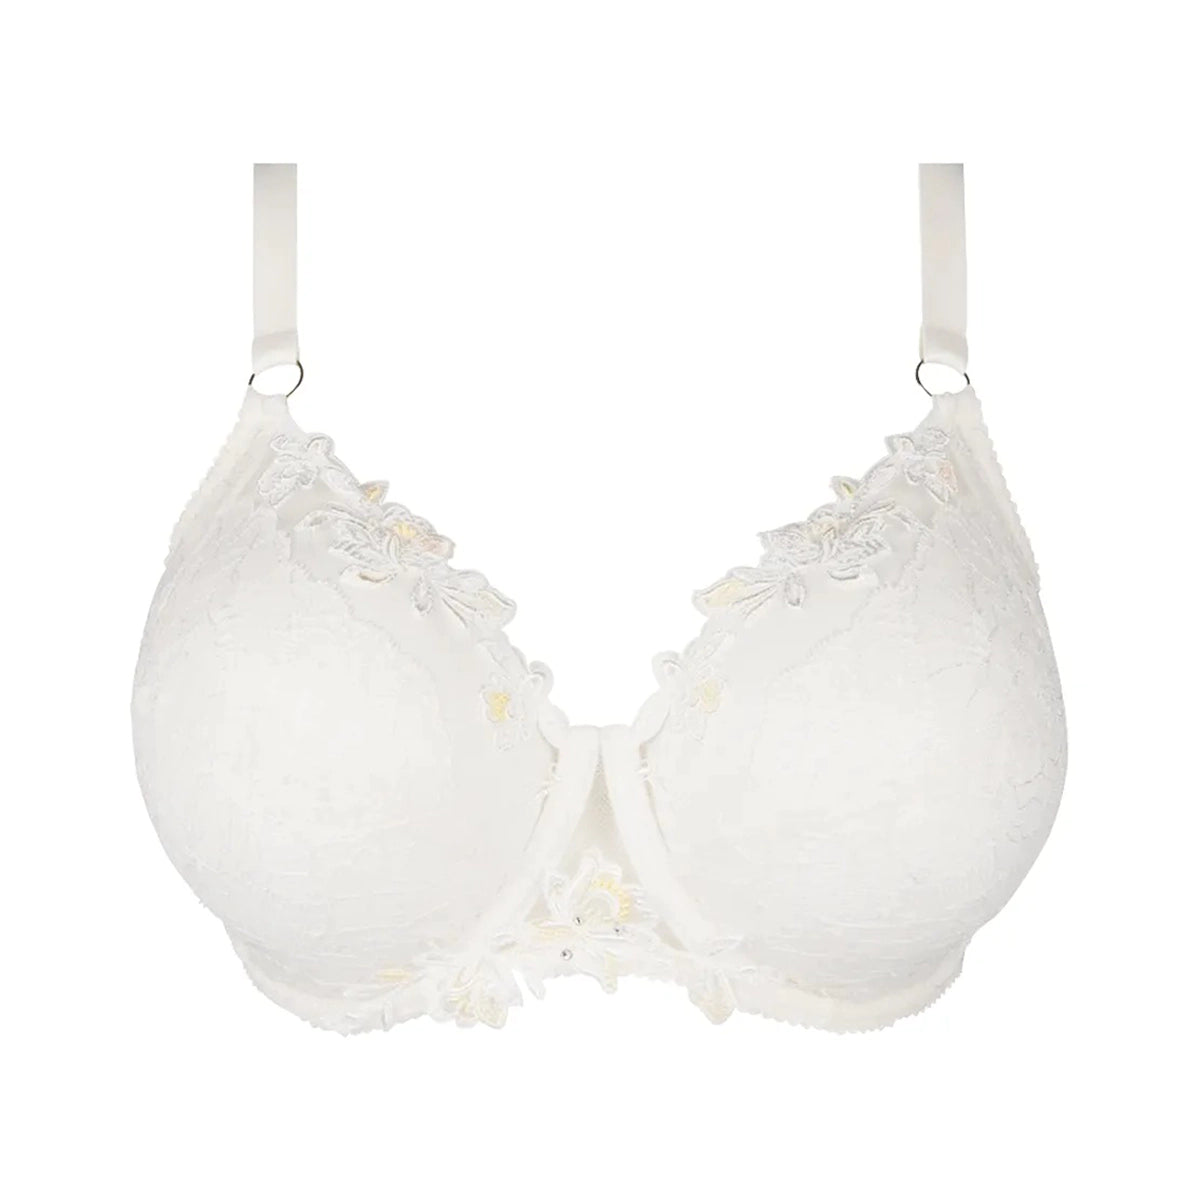 COVERED IN FULL! Soft Support, Shapely Cups, Stretchy Straps, Airy Lace,  Bra 38H